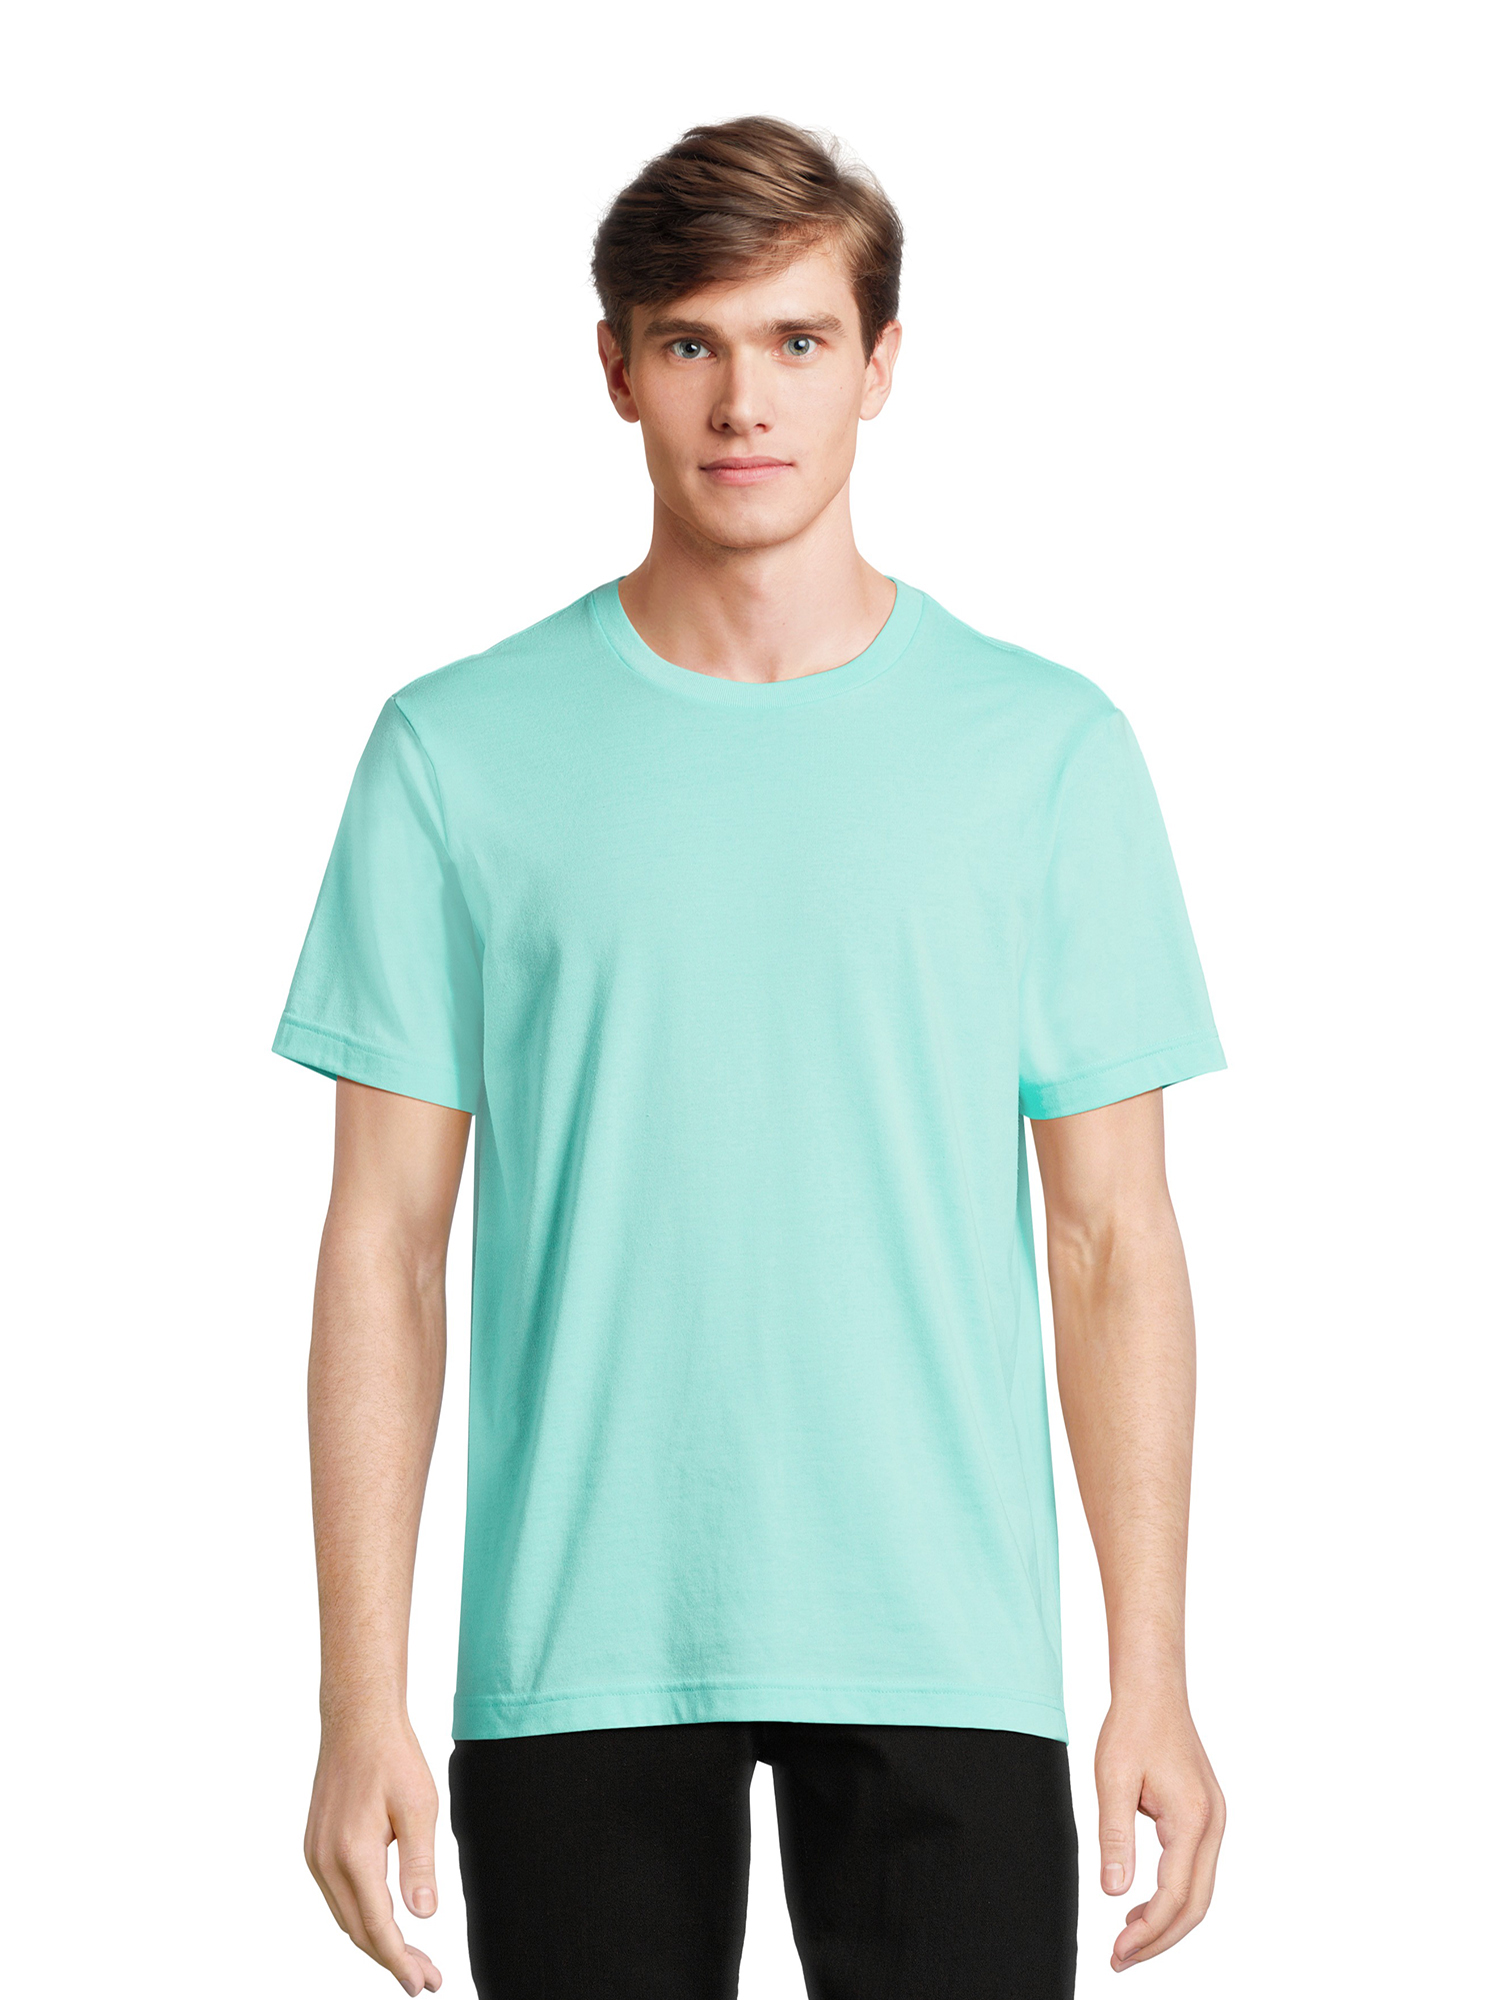 George Men's & Big Men's Crewneck Tee with Short Sleeves, Sizes XS-3XL - image 1 of 6